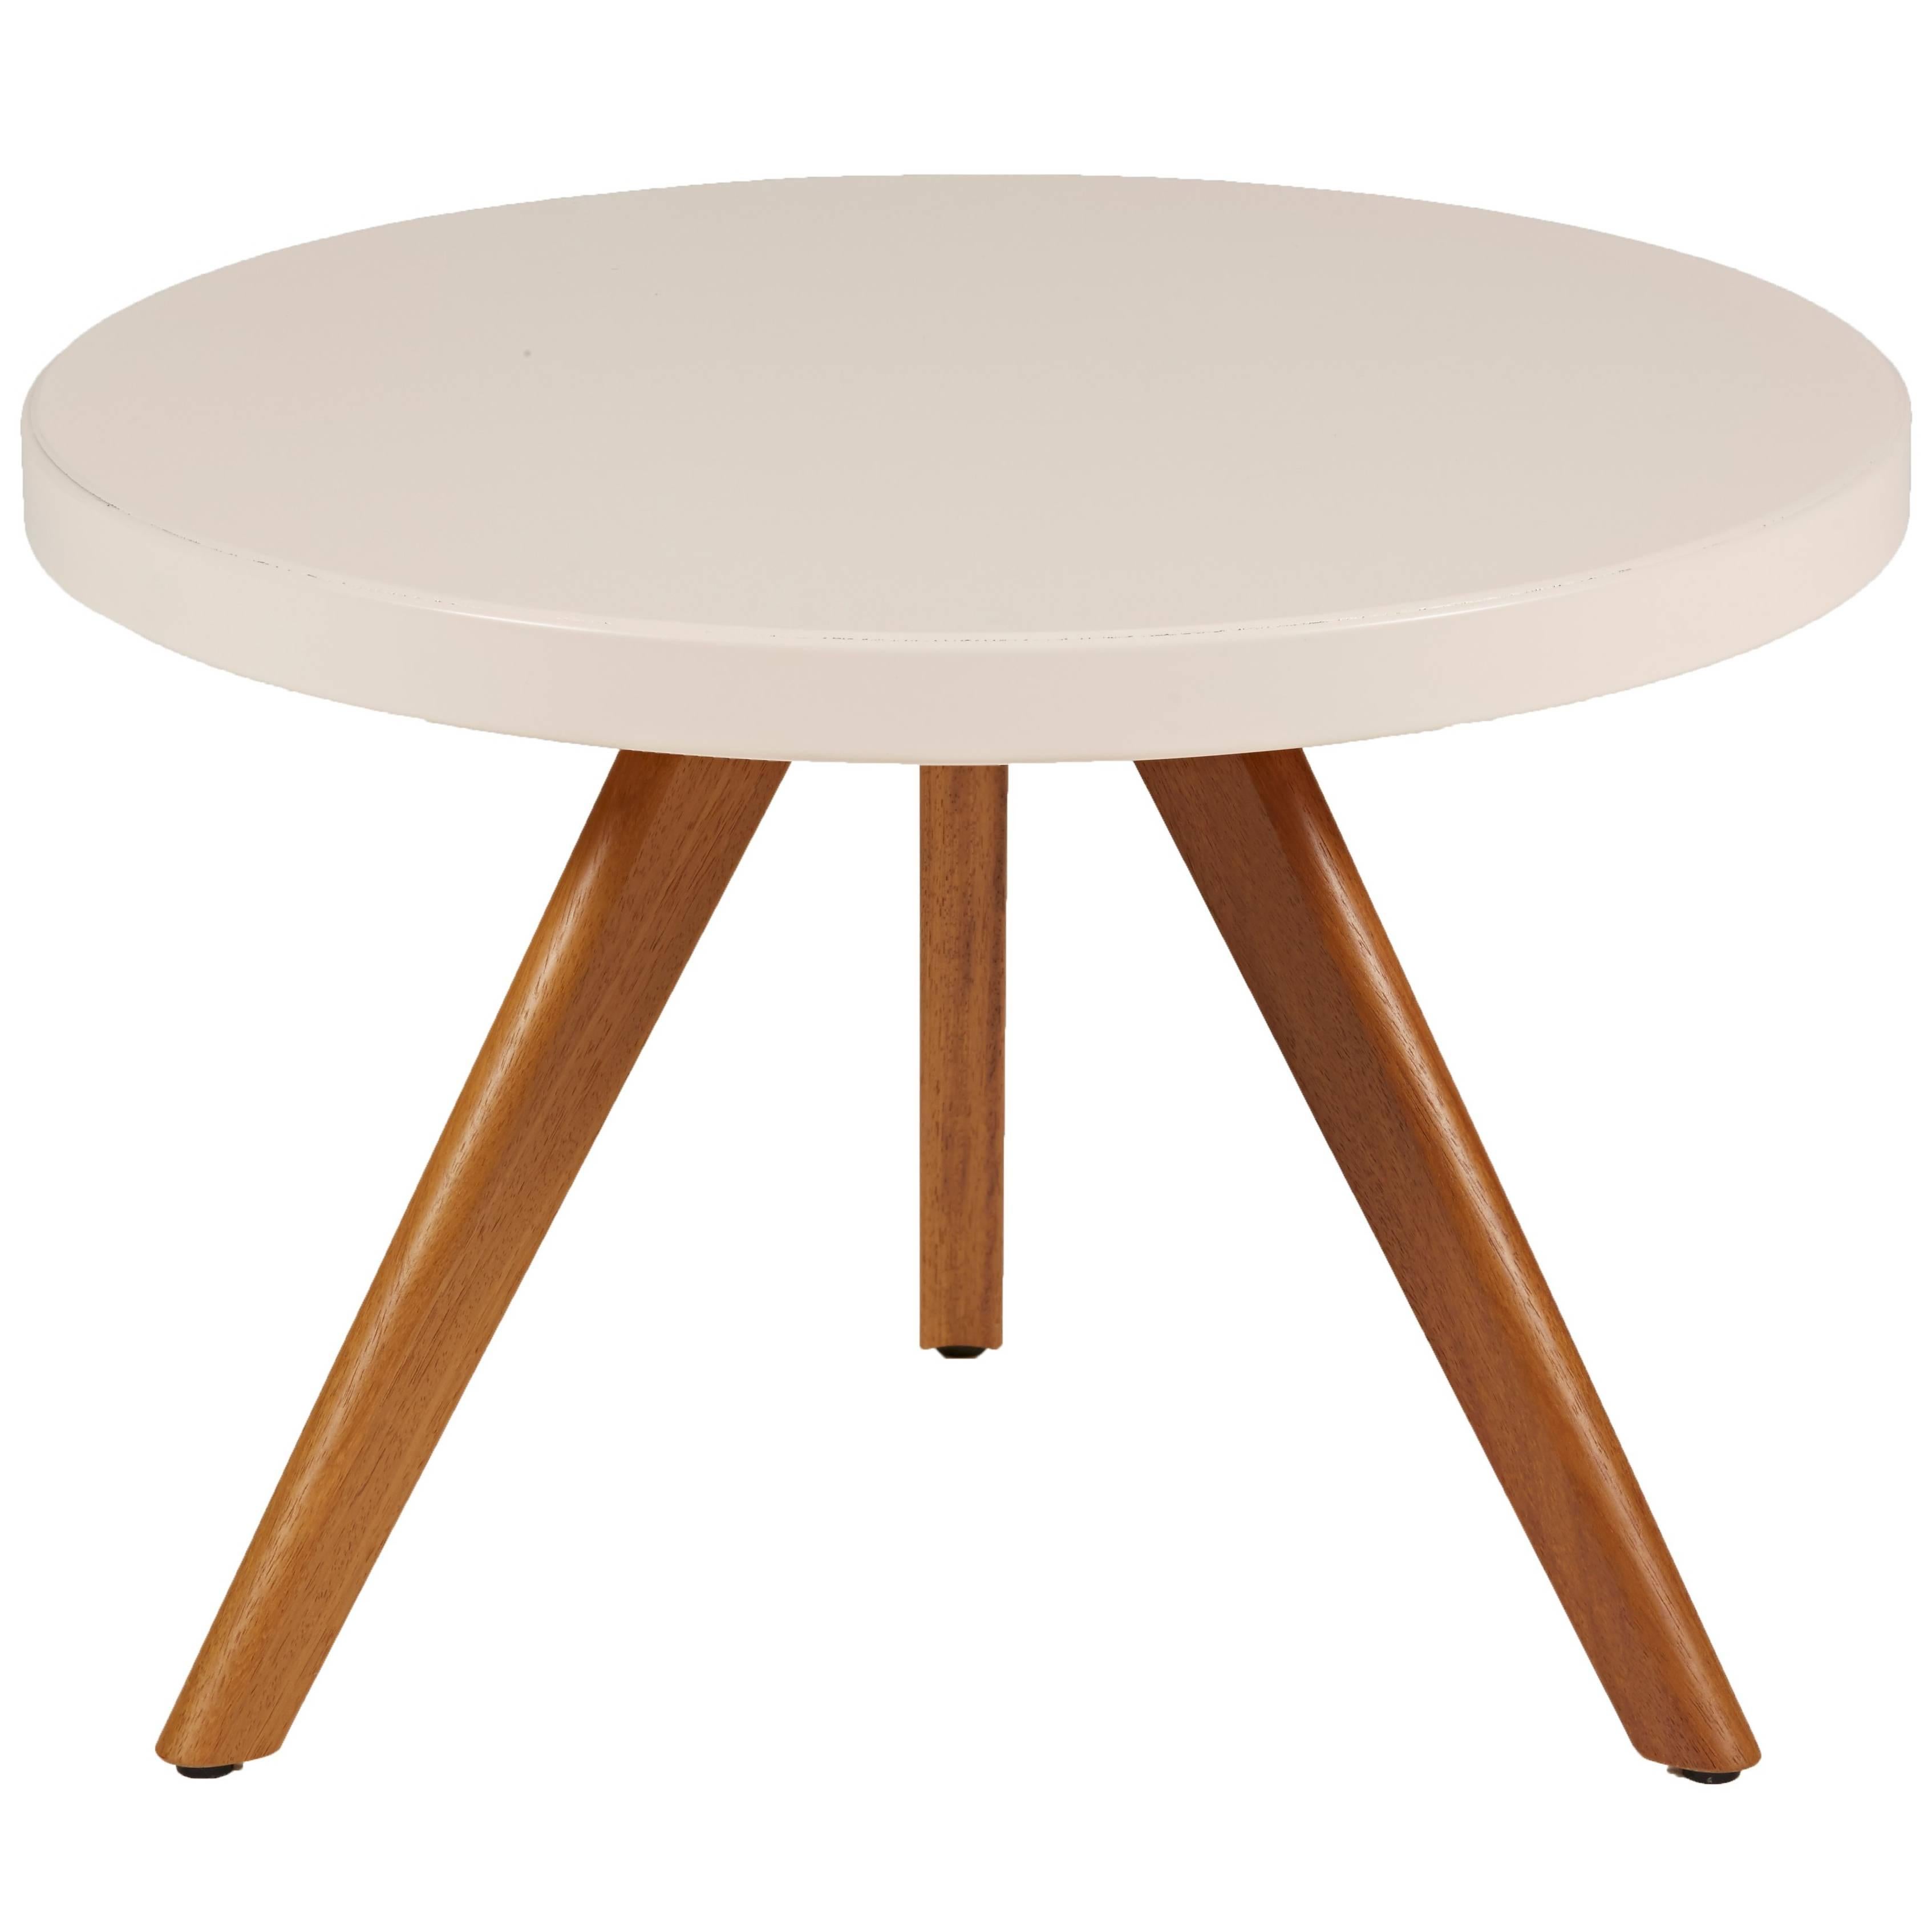 K17 Low Round Table 60 in Powder Pink with Wood Legs by Tolix For Sale